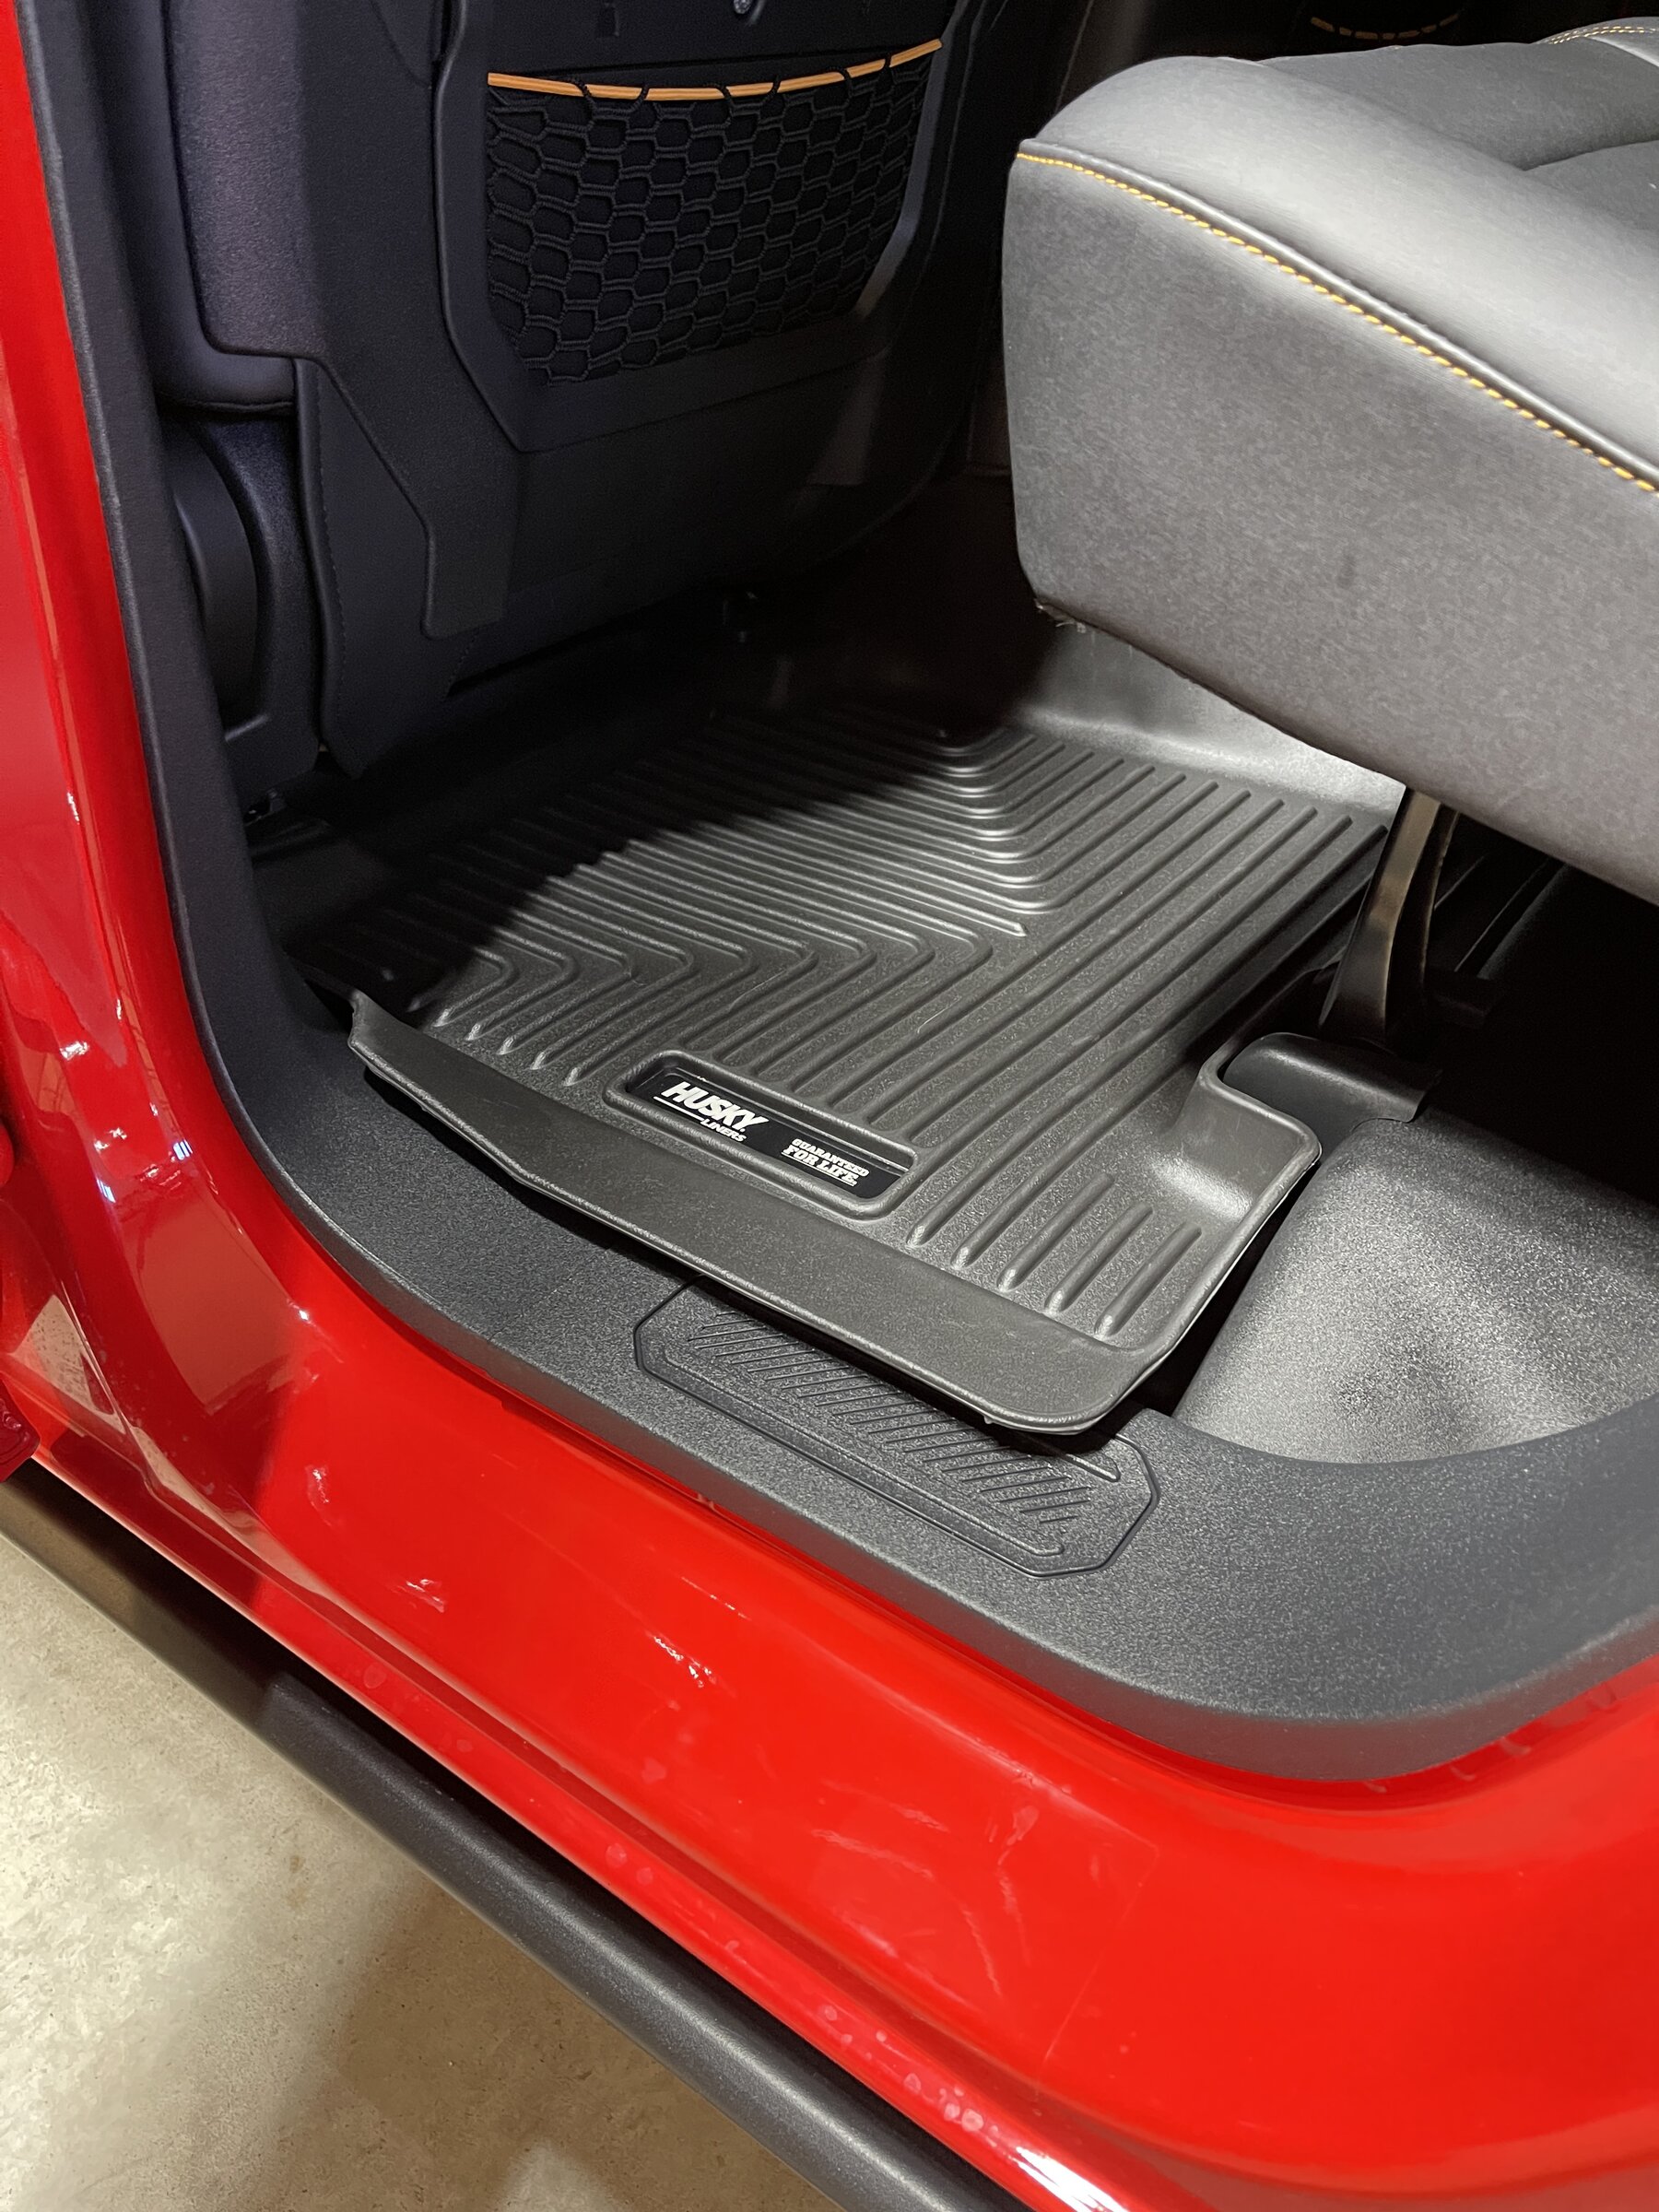 Ford Bronco Review: Husky X-act Contour Mats (2nd row) with Washout/Rubberized Floor 111898D3-CAA9-49C2-A80E-2731D5D164CC